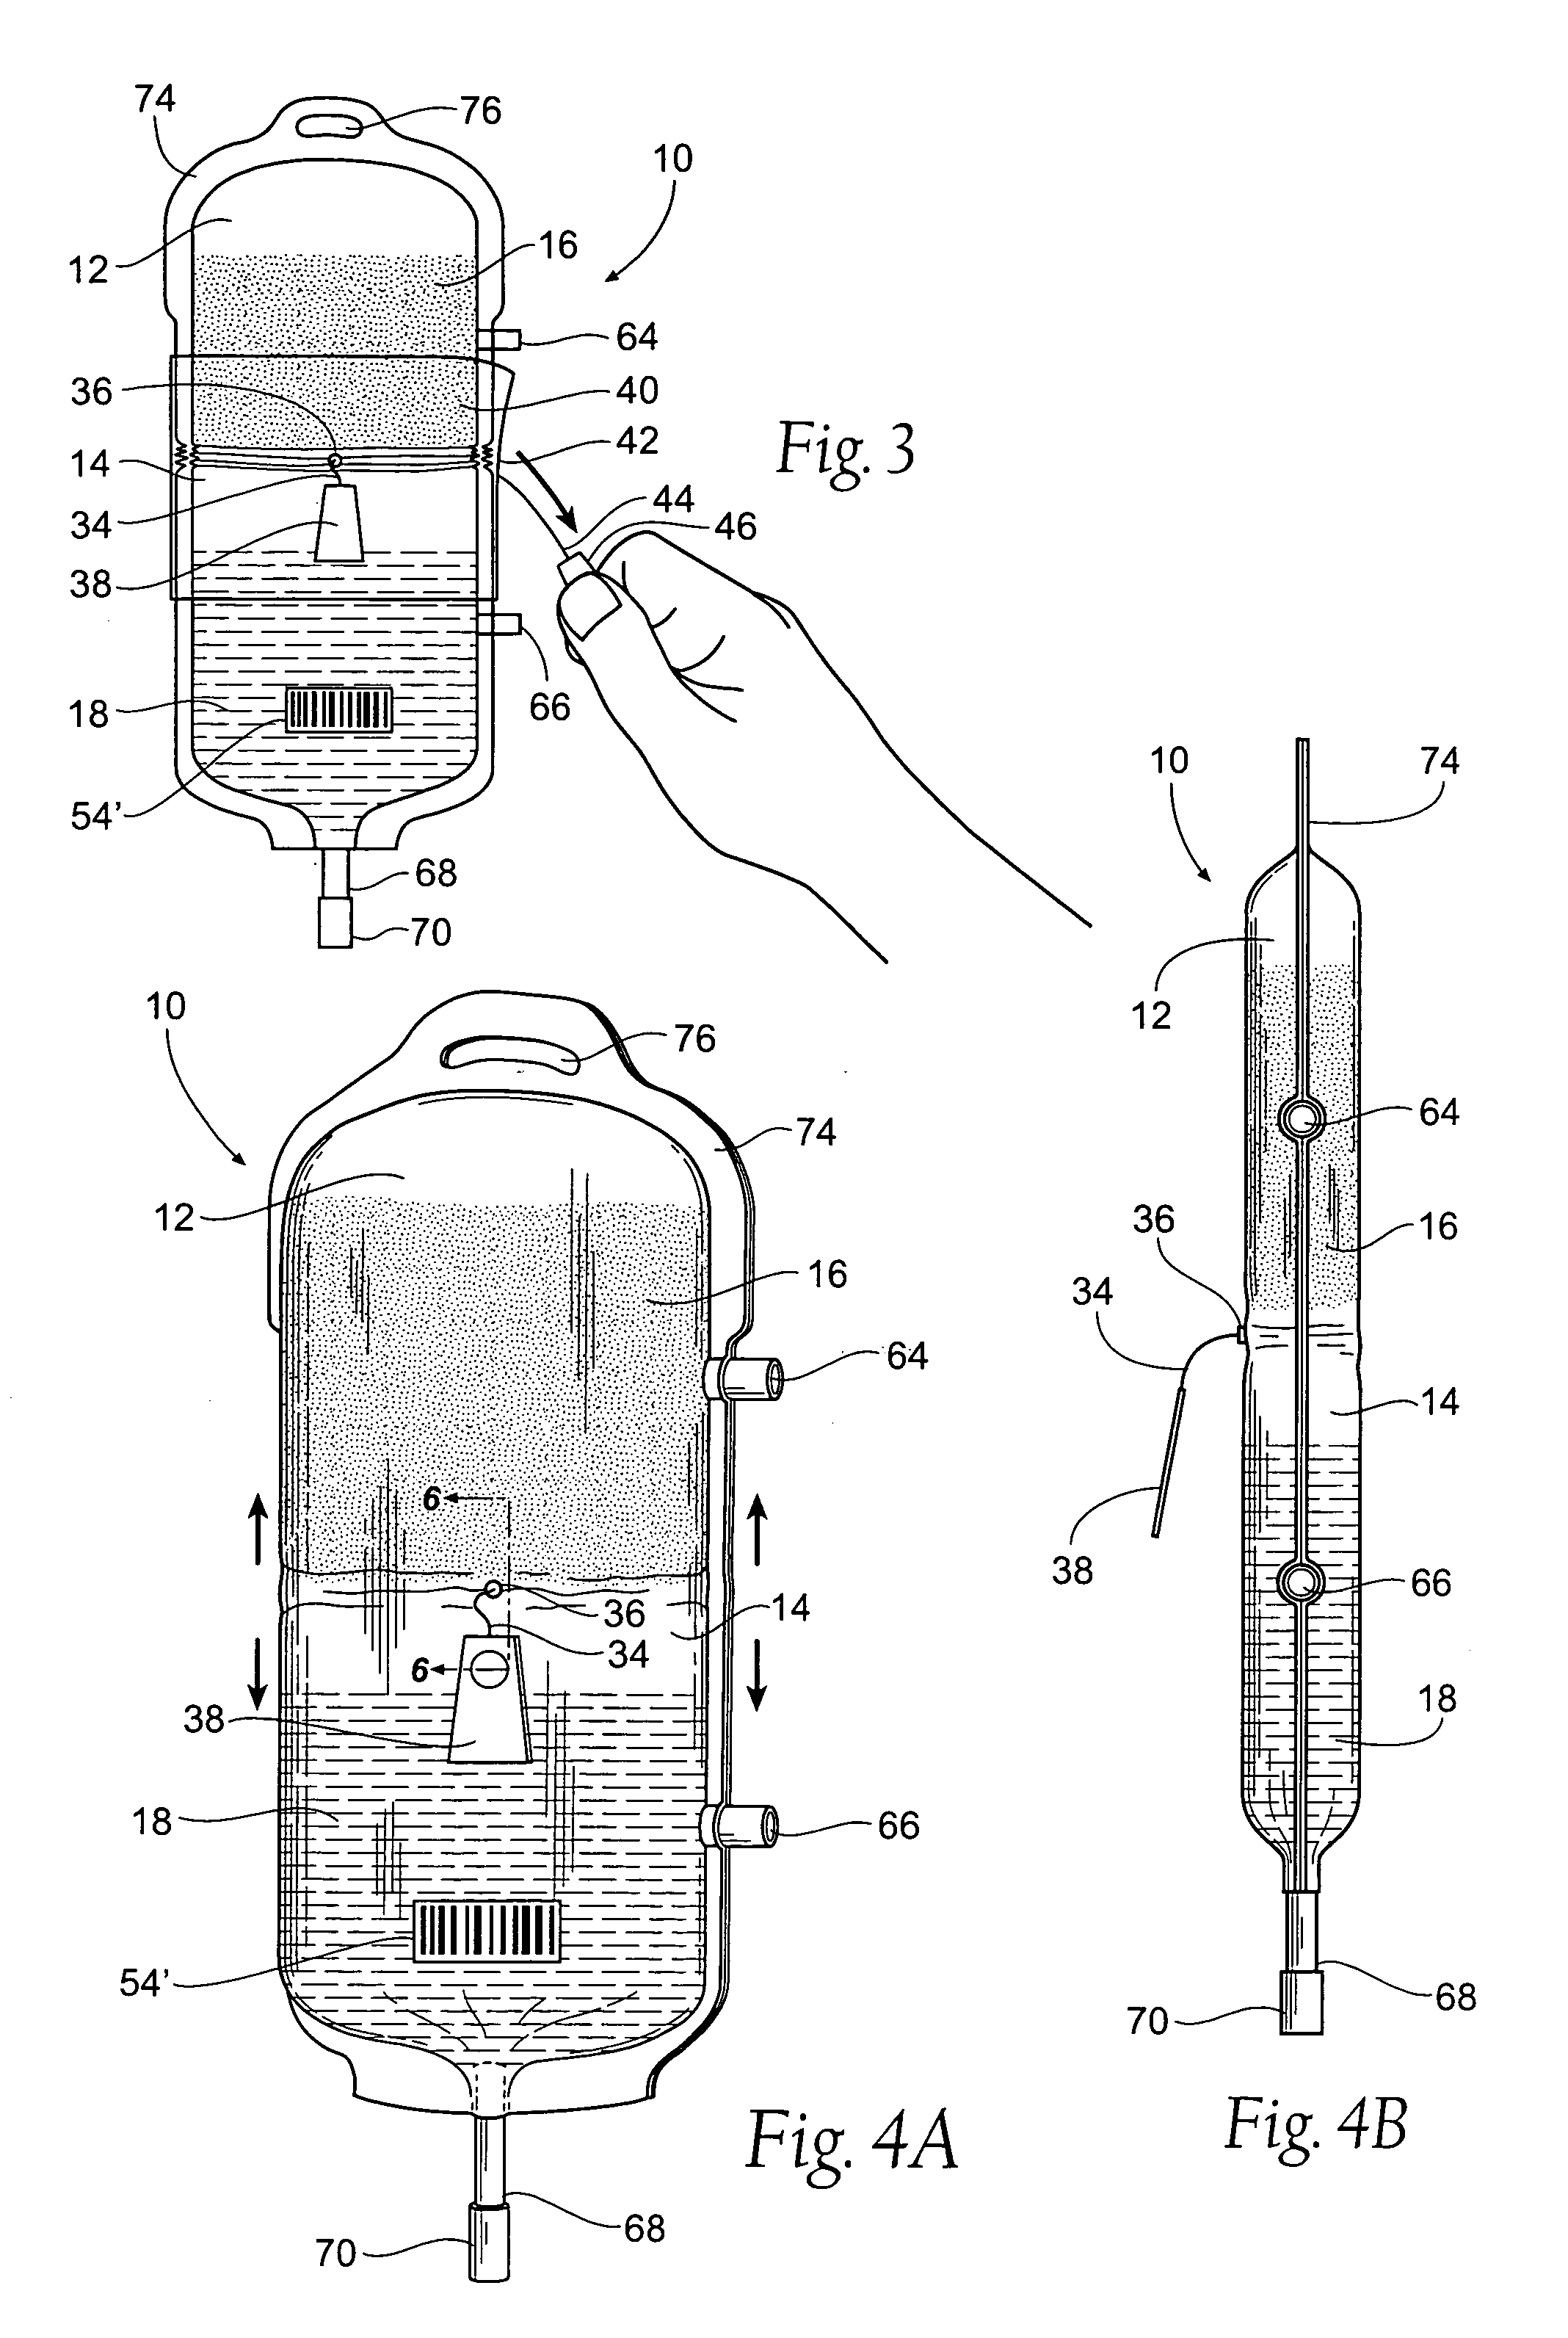 Apparatus and methods for making, storing, and administering freeze-dried materials such as freeze-dried plasma